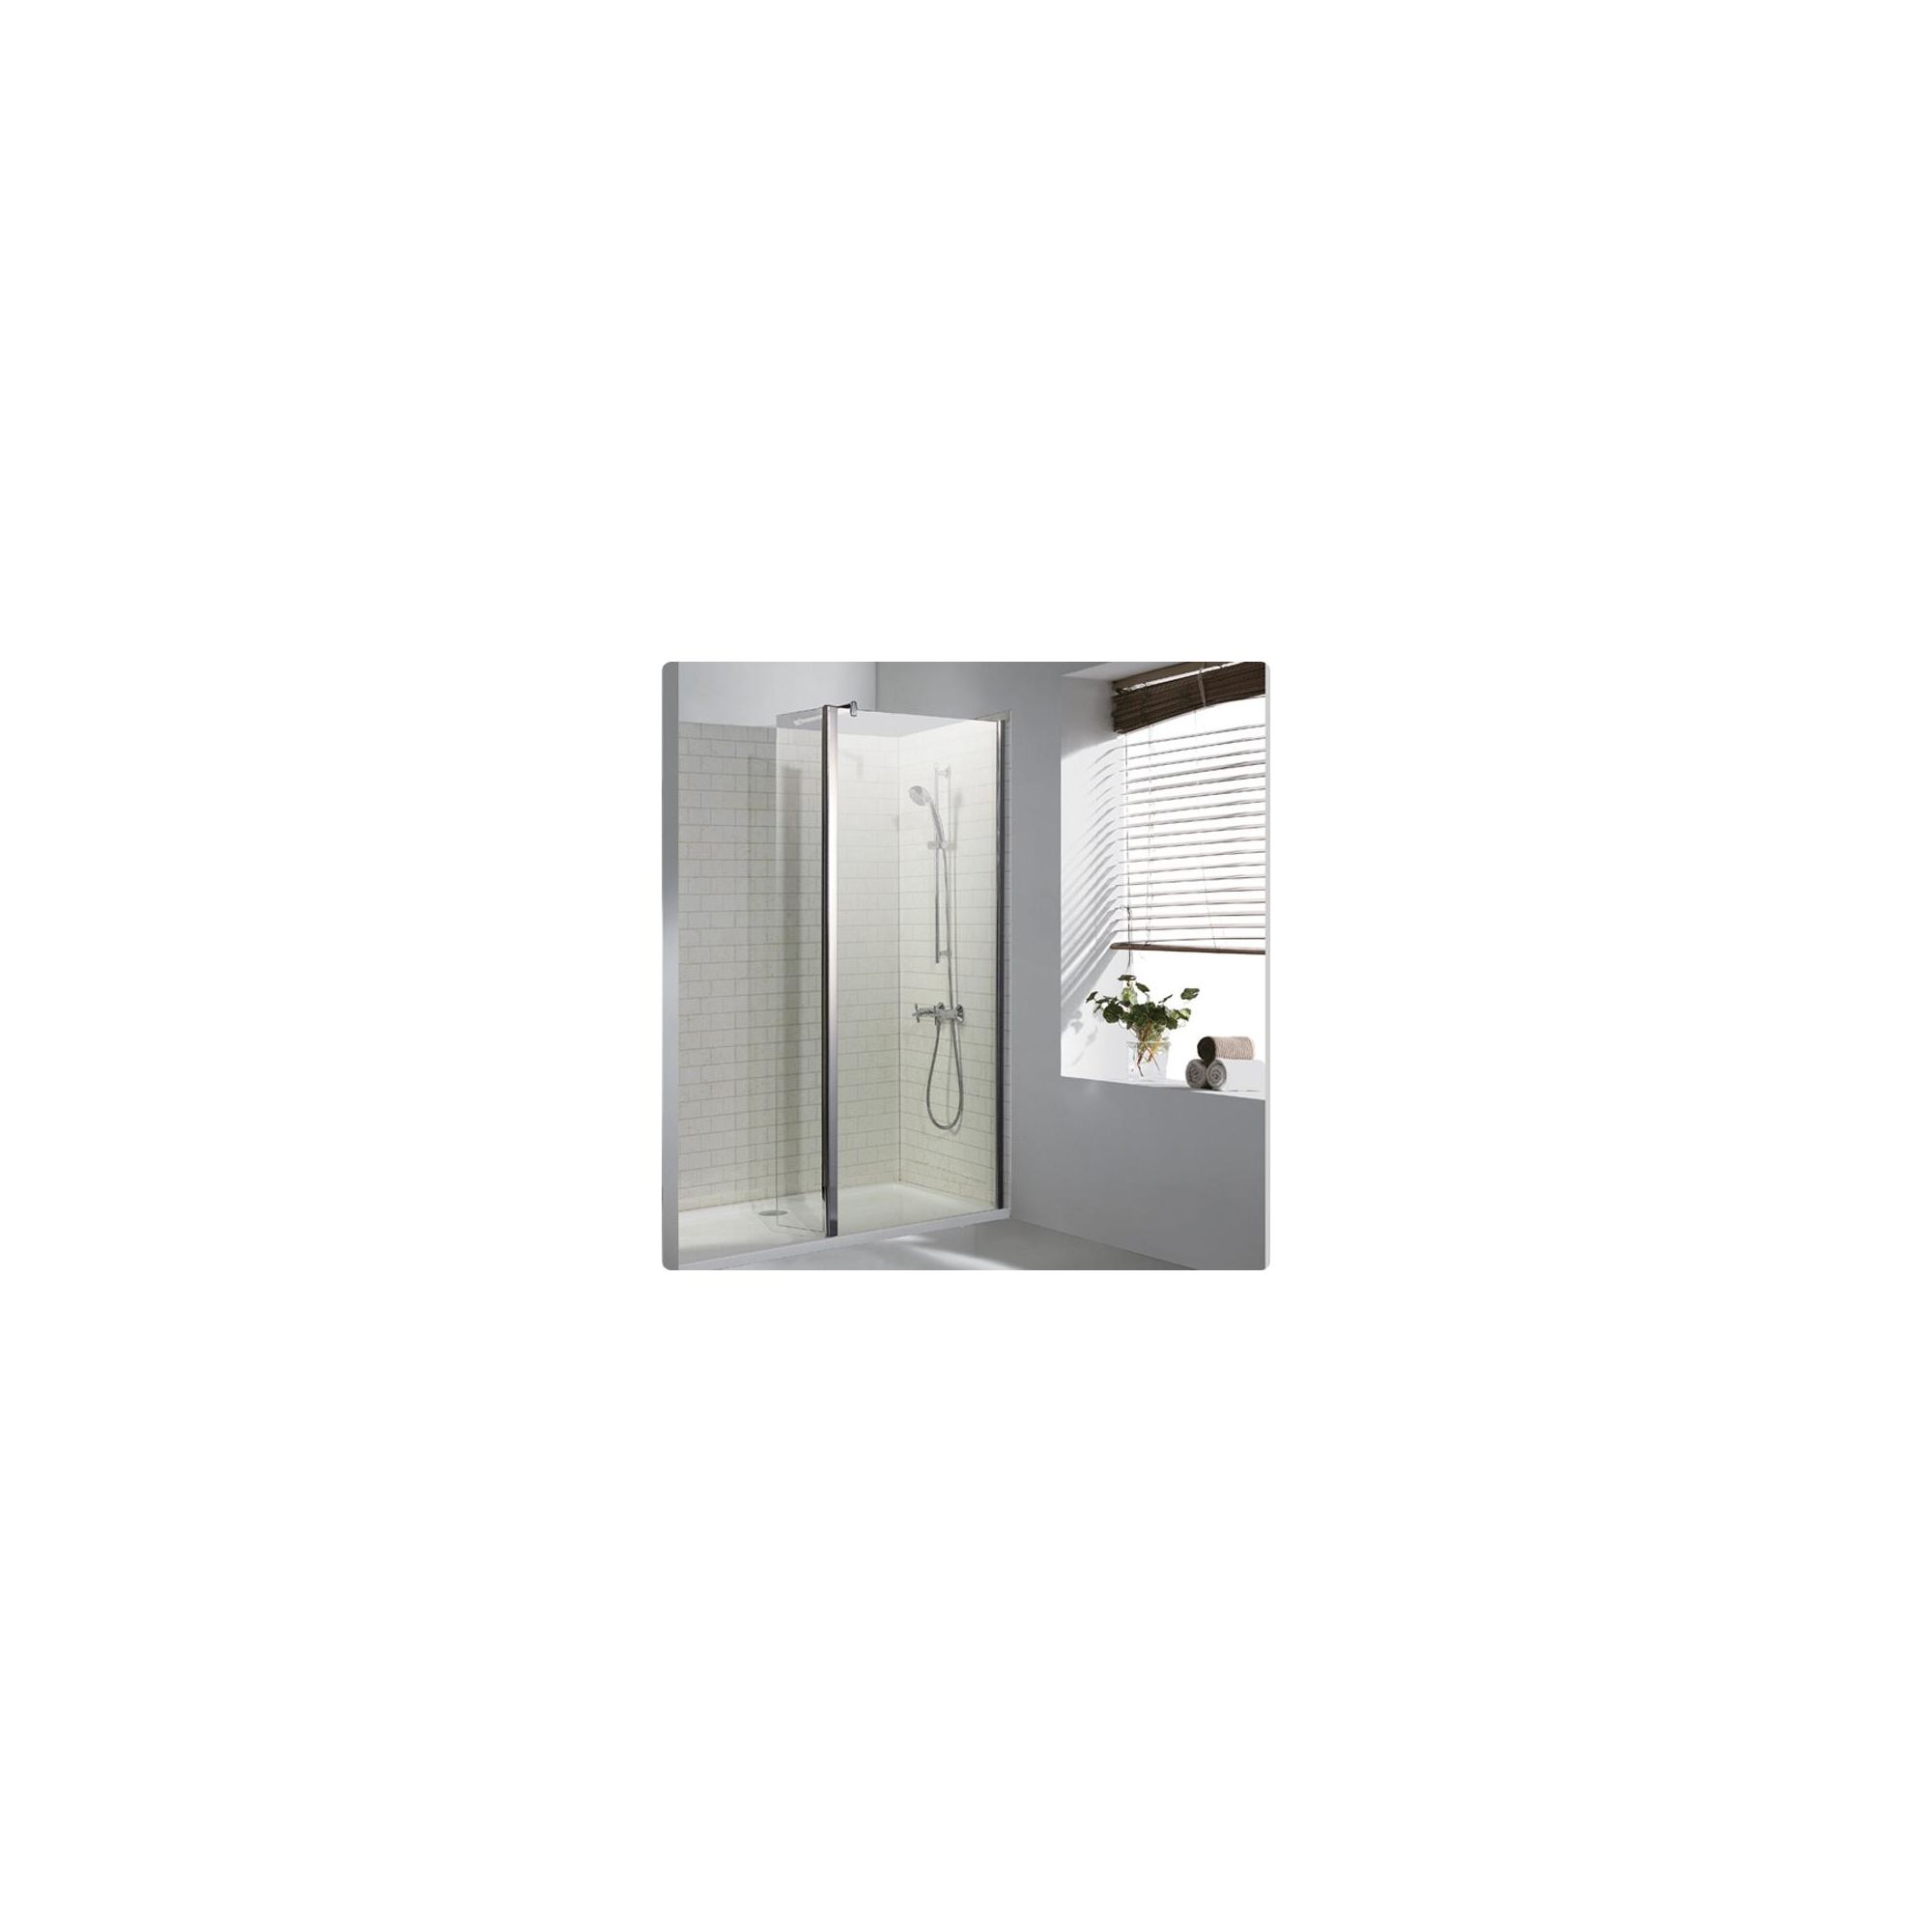 Duchy Choice Silver Walk-In Shower Enclosure 1400mm x 800mm (Complete with Tray), 6mm Glass at Tescos Direct